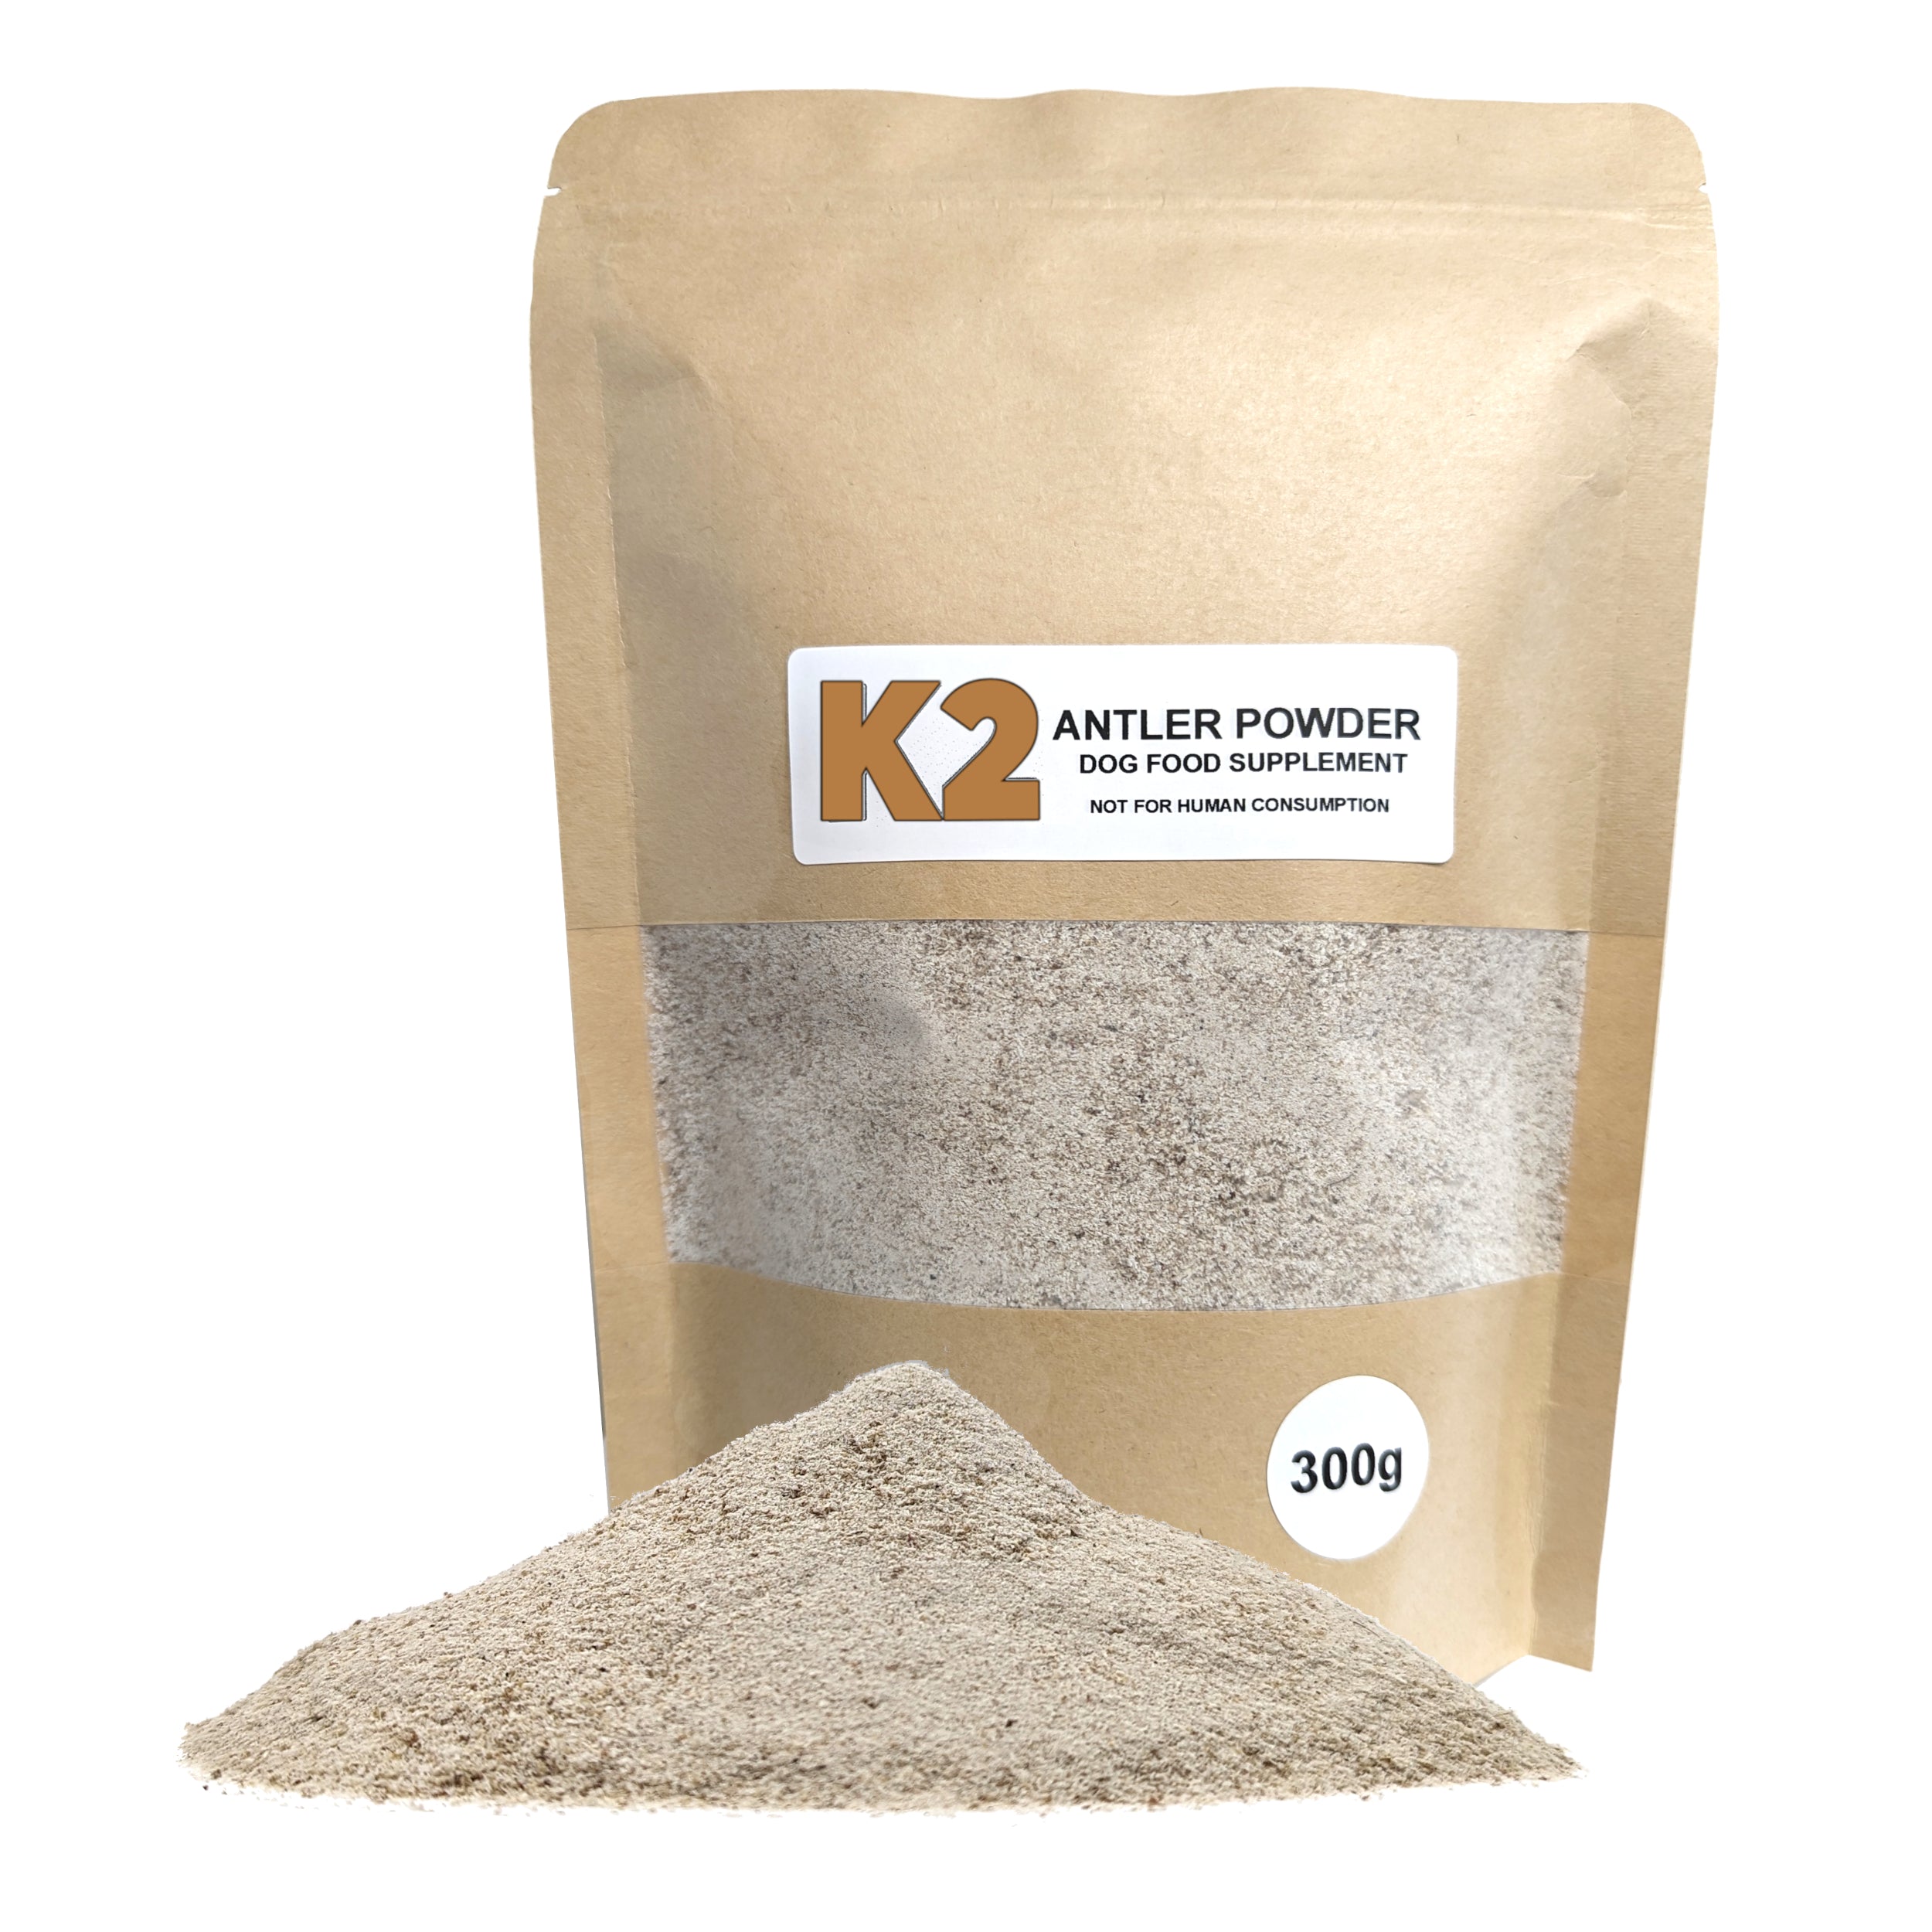 K2 Dog Chews Pure Antler Powder Natural Supplement for Dogs